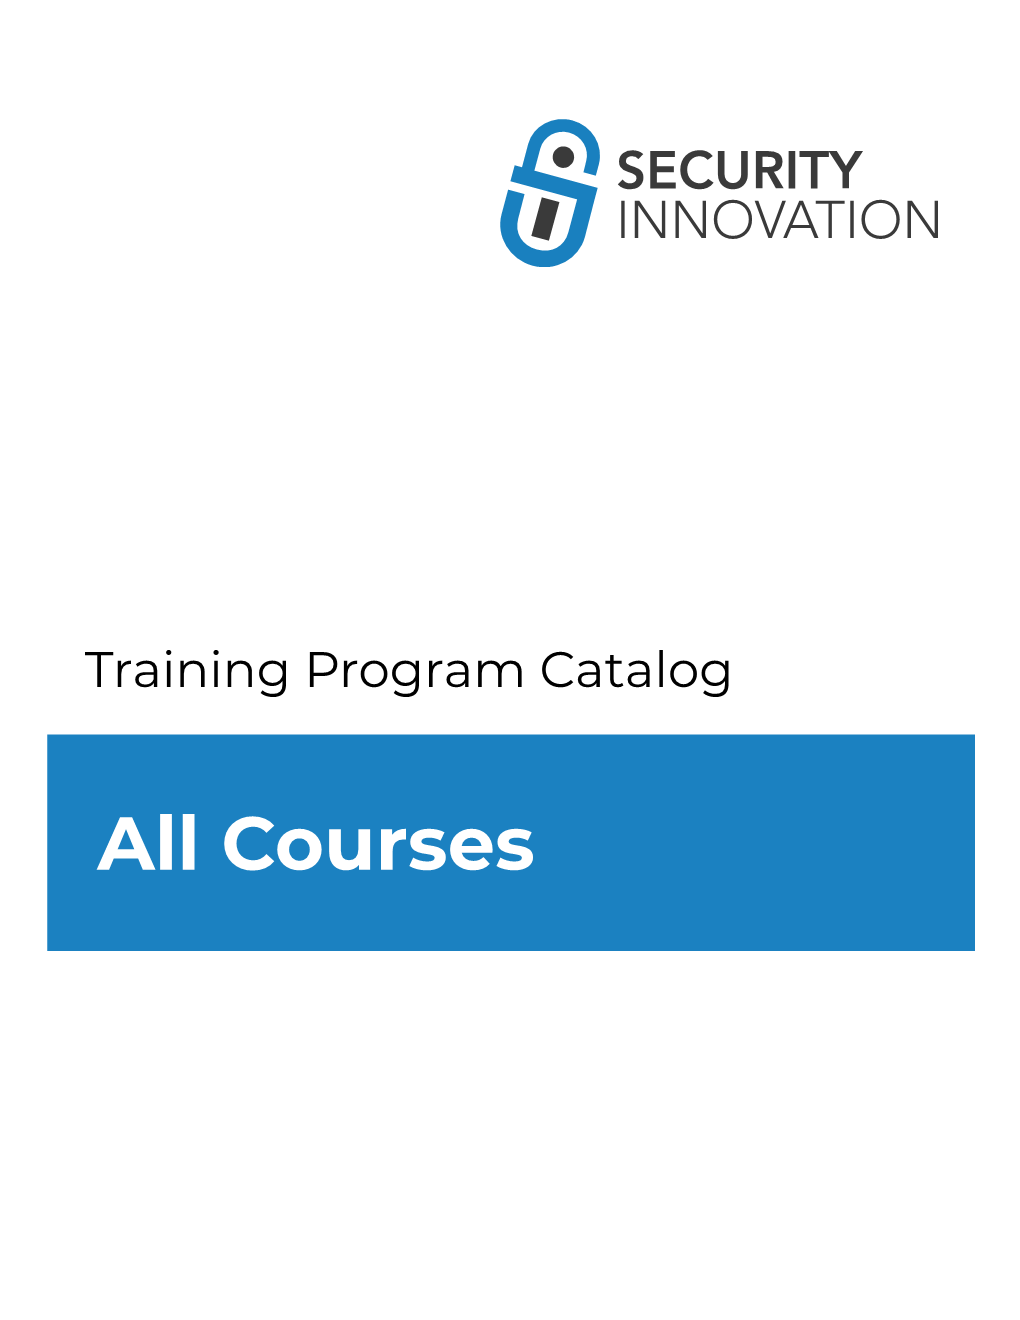 Course Catalog Download